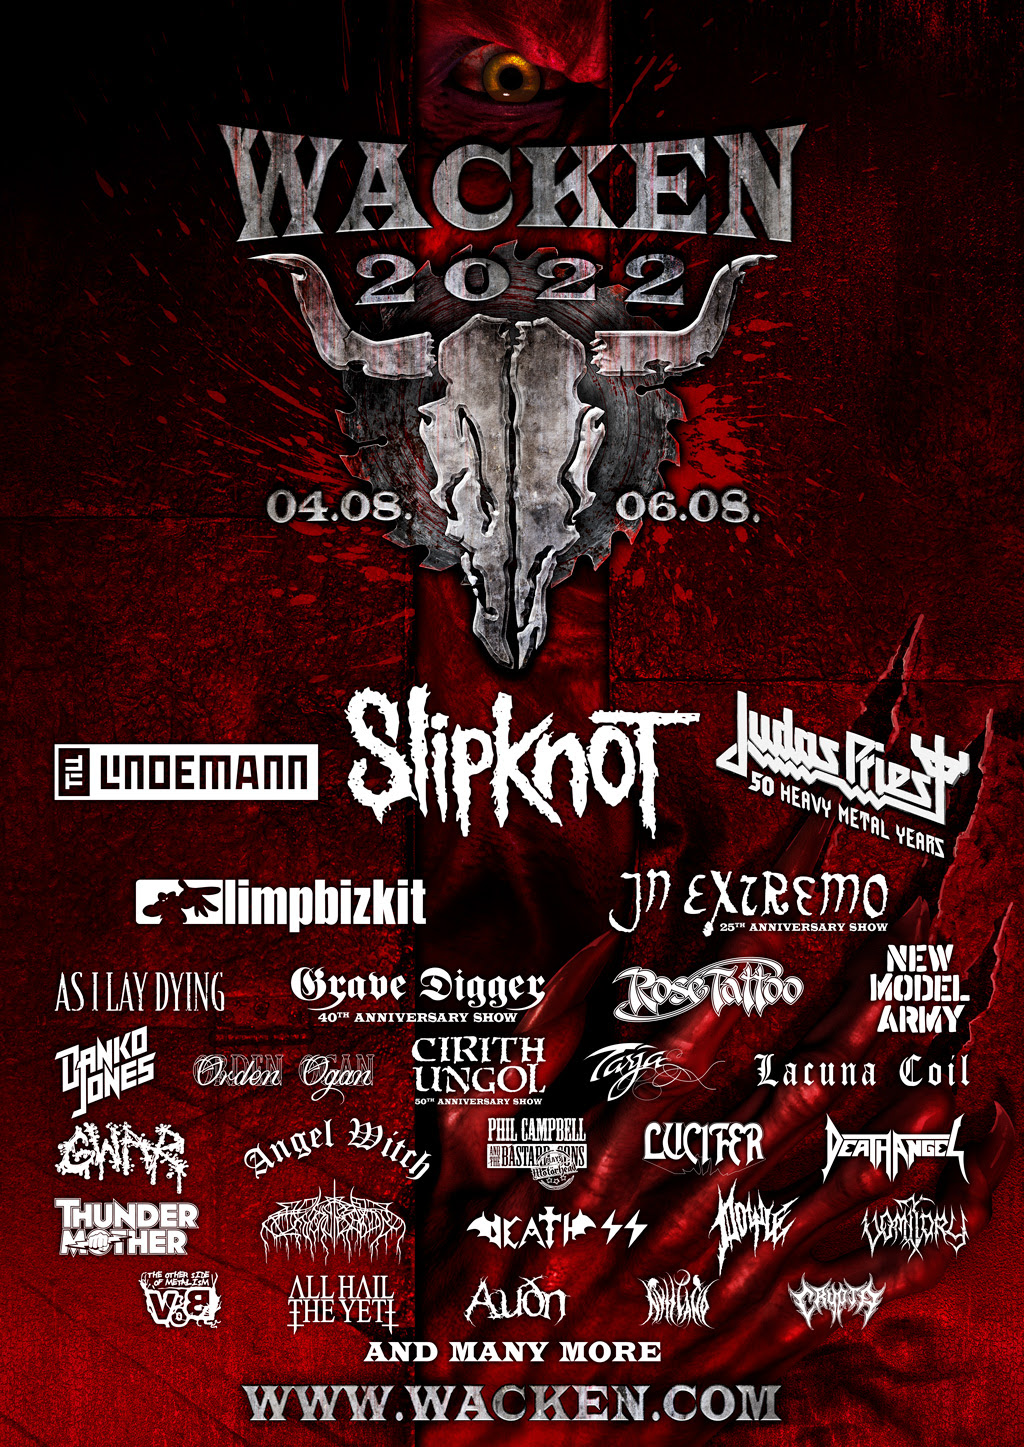 New Bands For WOA 2022 Confirmed • TotalRock